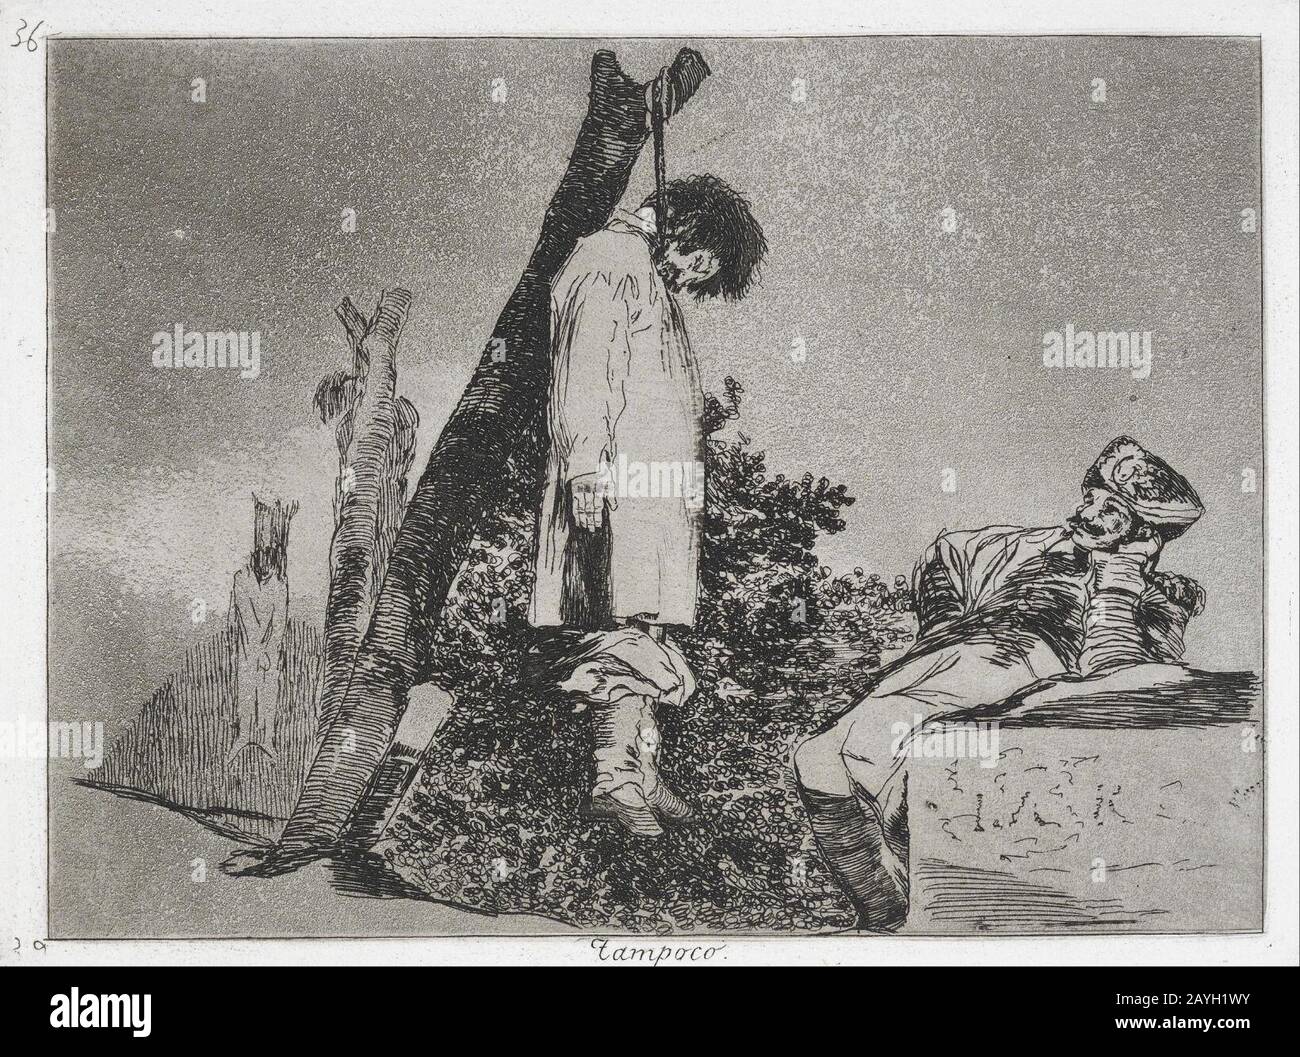 Francisco de Goya - Not (in this case) either (Tampoco) from the series The Disasters of War (Los Desastres de la Guerra... Stock Photo